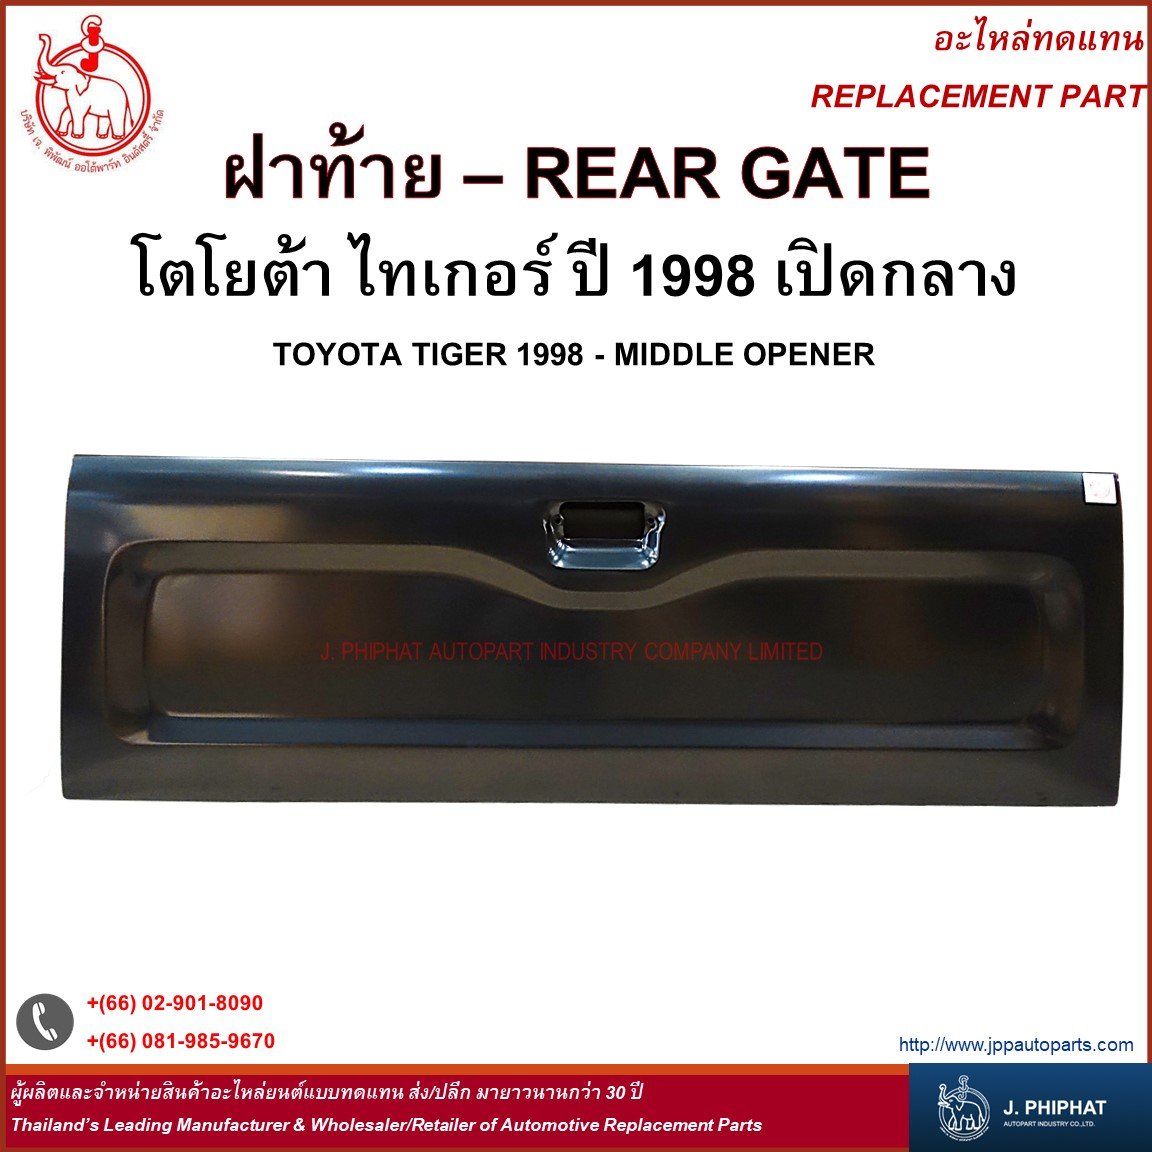 Rear Gate for Toyota TIGER '98 Middle opener